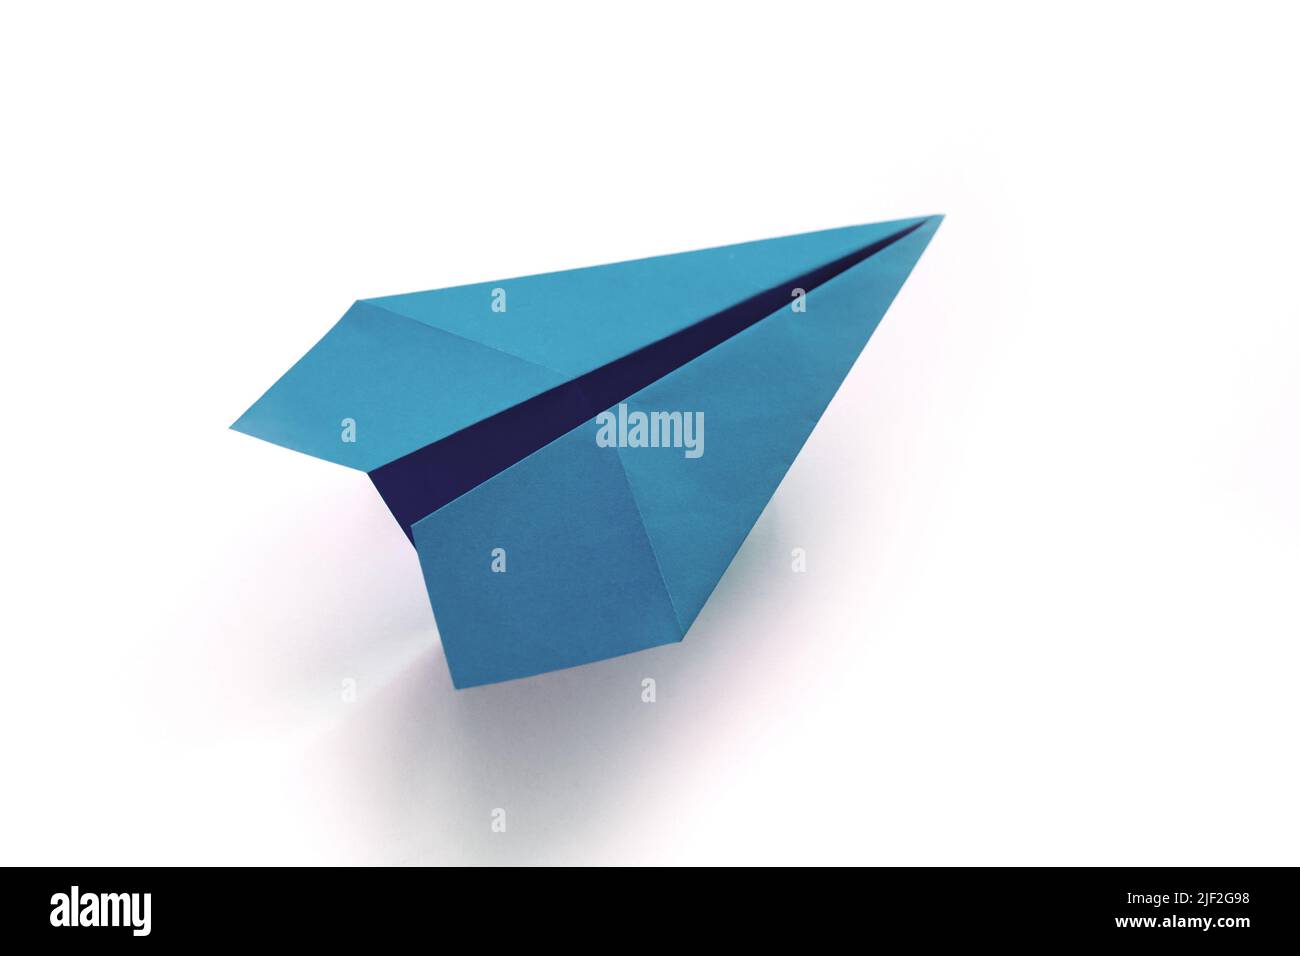 Blue paper plane origami isolated on a blank white background Stock Photo